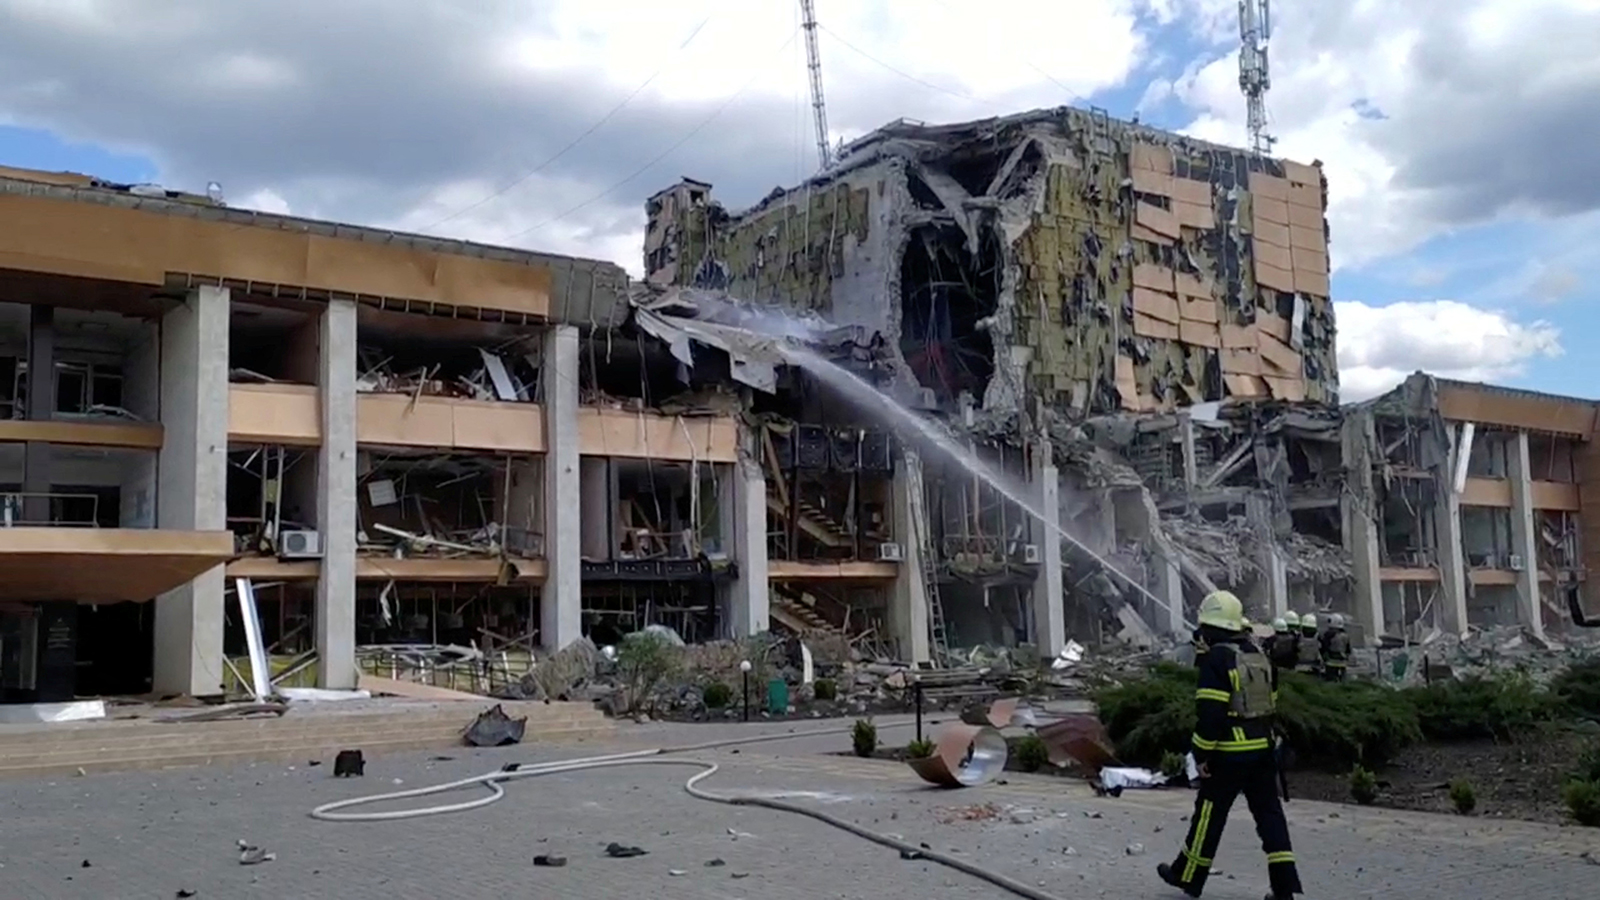 Firefighters work at the scene after an airstrike on the Cultural Center, in Lozova, Kharkiv region, Ukraine on Friday, May 20.